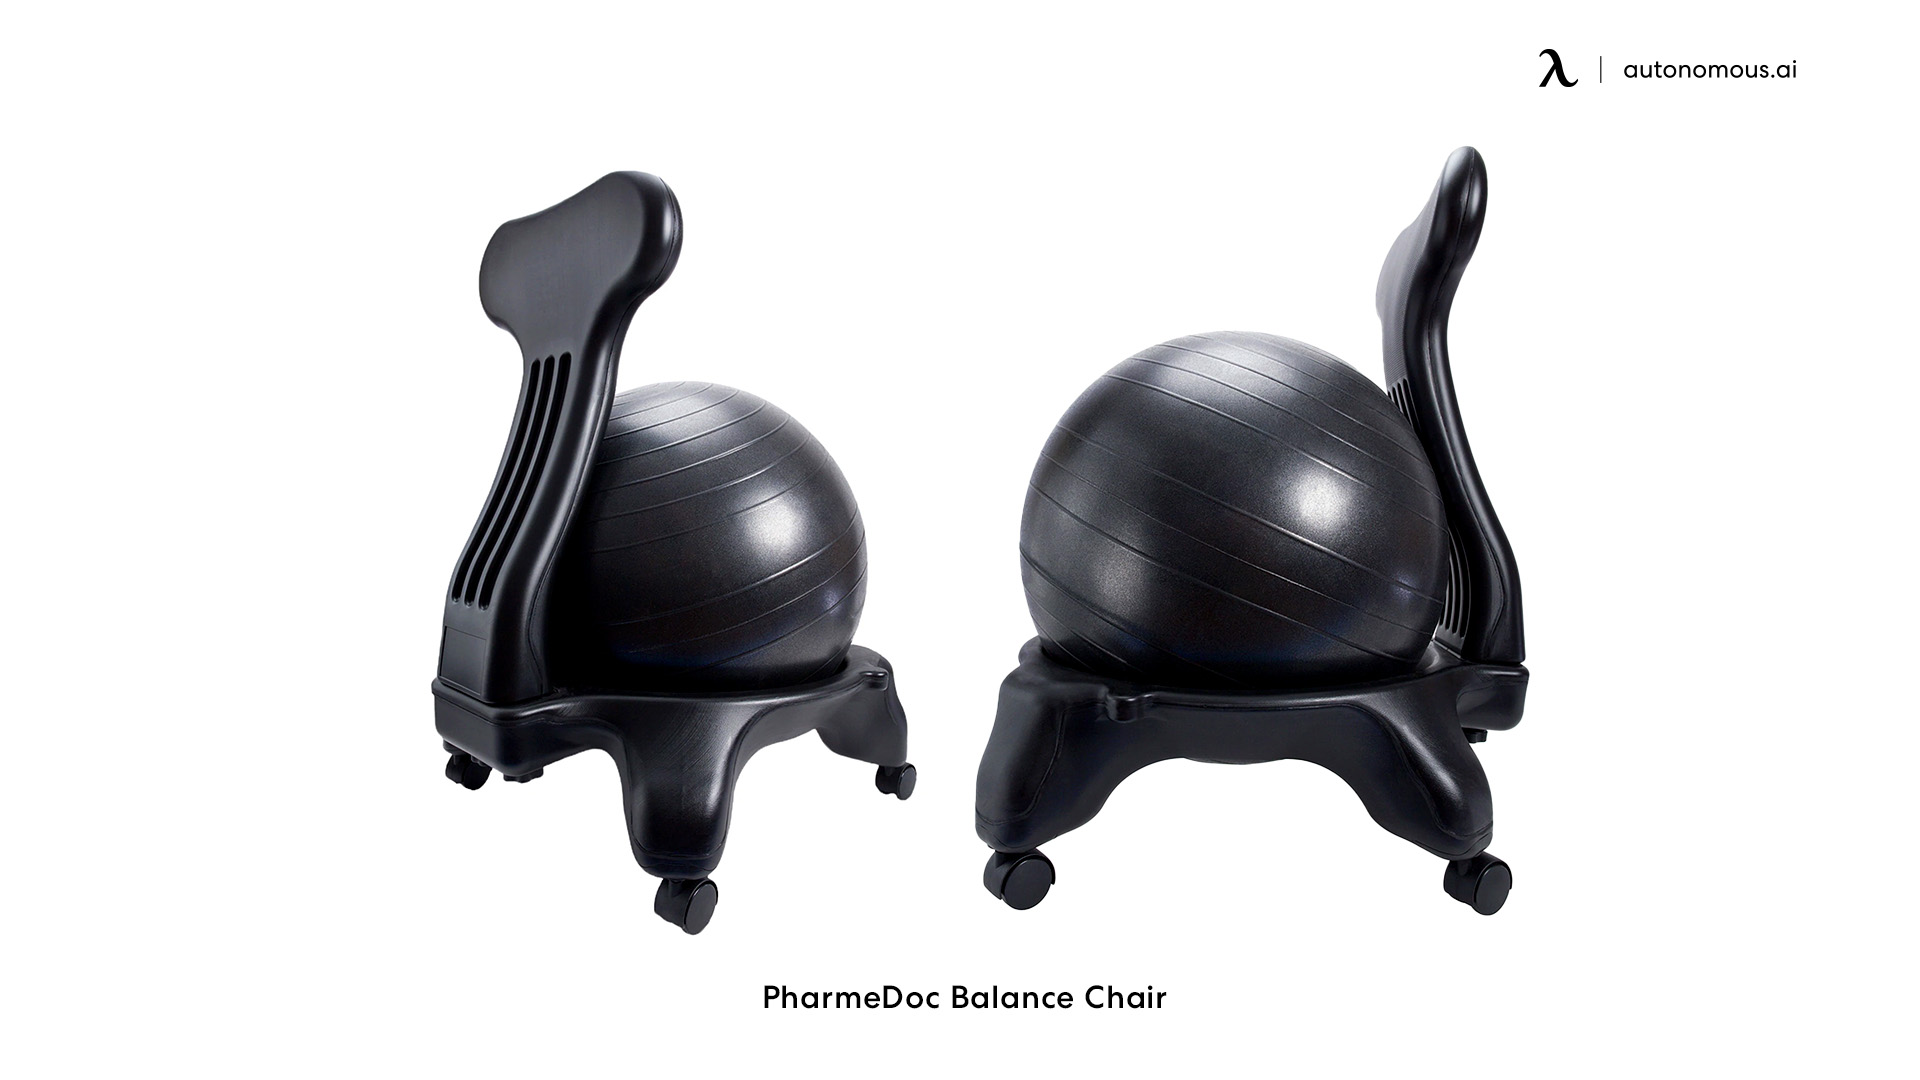 PharmeDoc stability ball chair for office